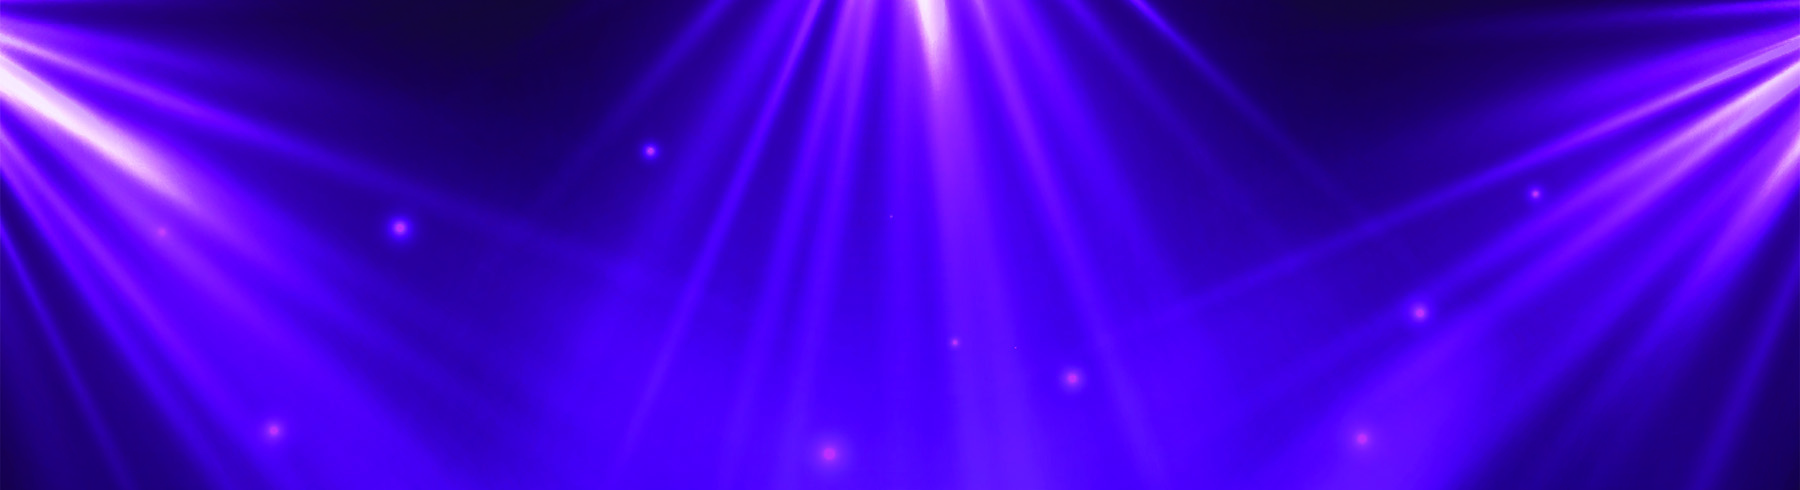 A stylised photograph of stage curtains and lighting